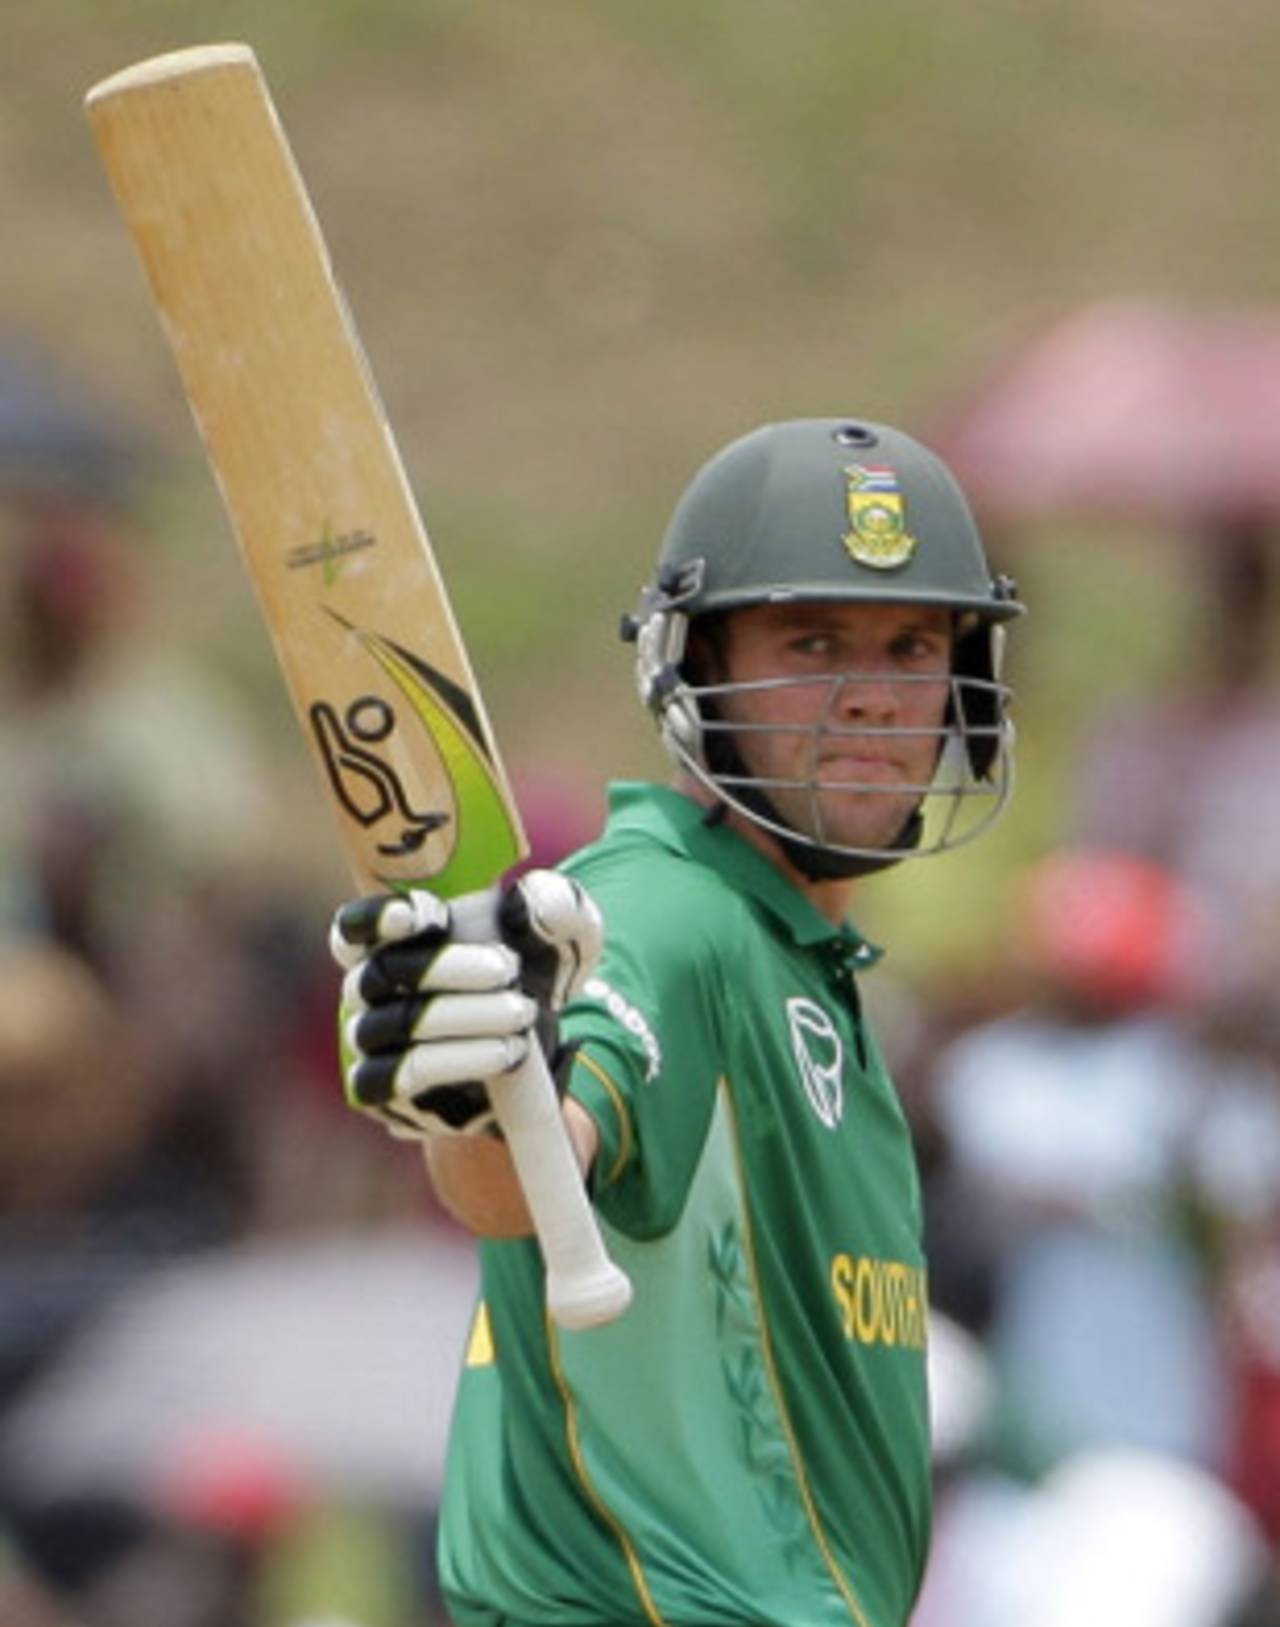 AB de Villiers salutes the crowd on reaching his half-century, West Indies v South Africa, 3rd ODI, Dominica, May 28, 2010